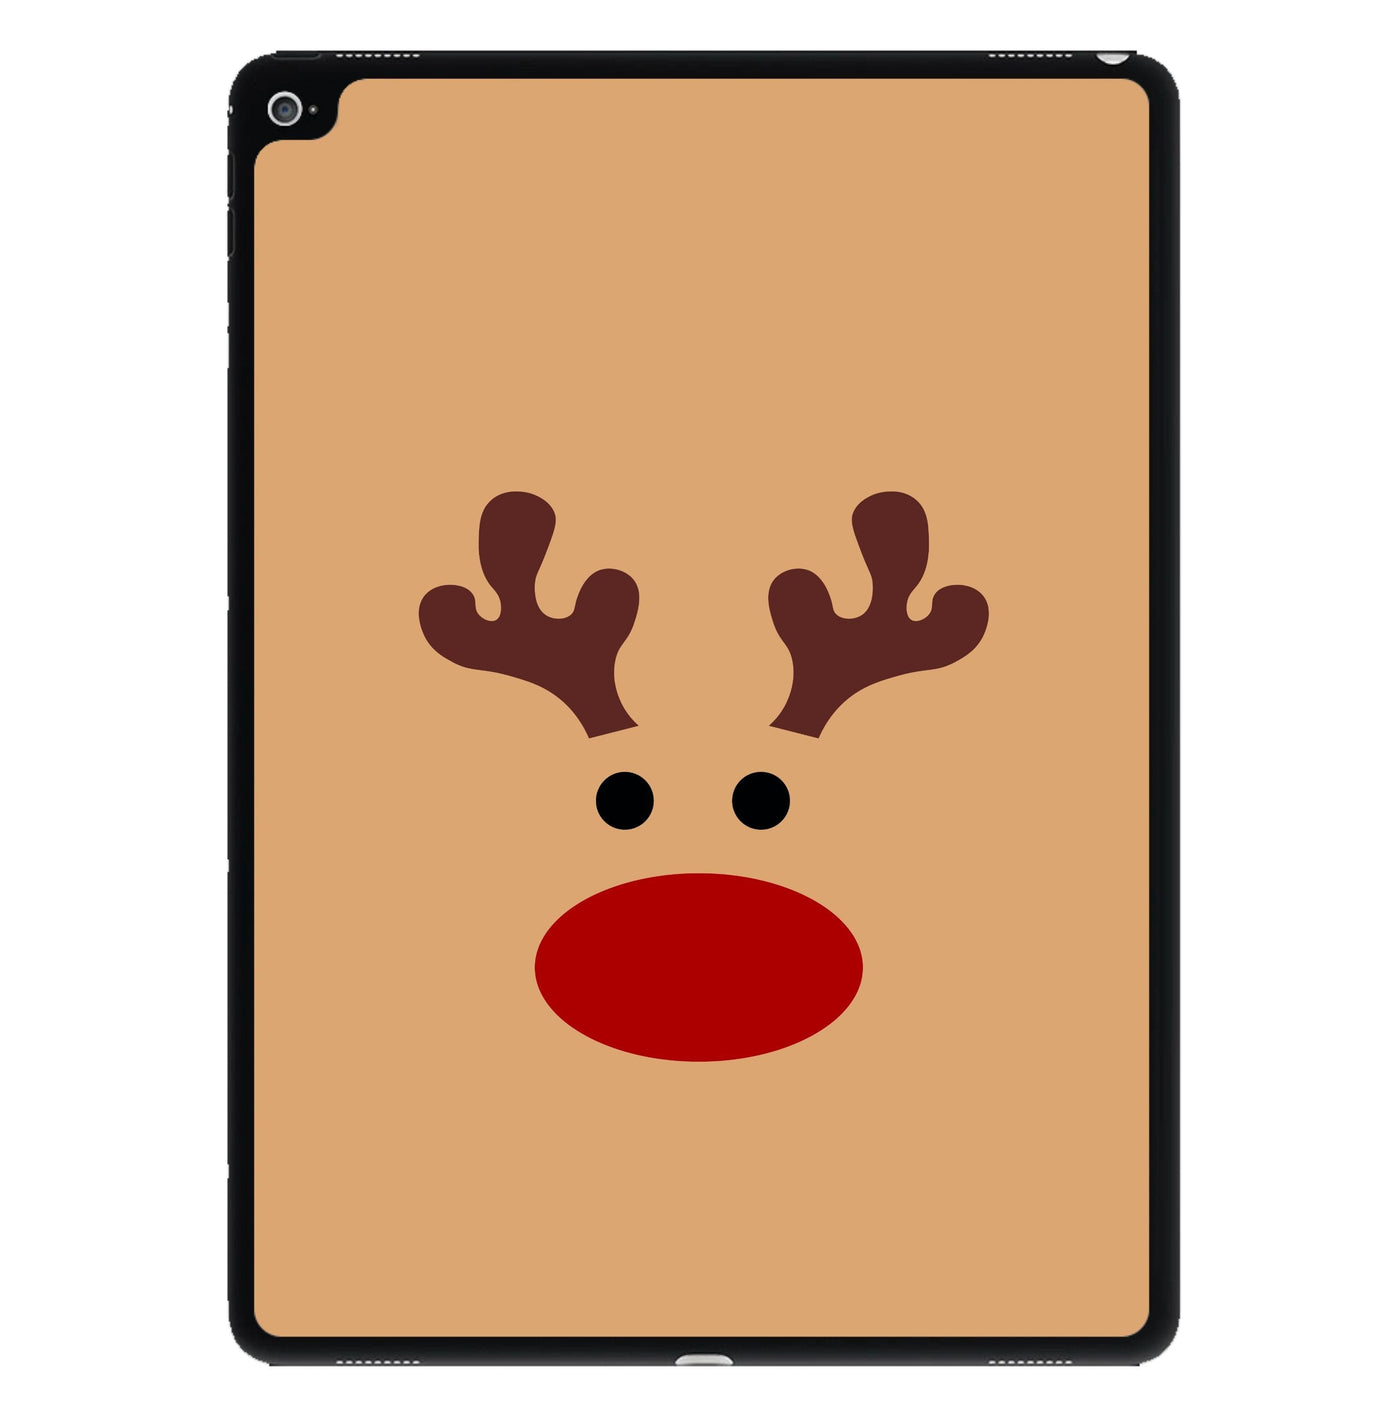 Rudolph Red Nose - Christmas iPad Case